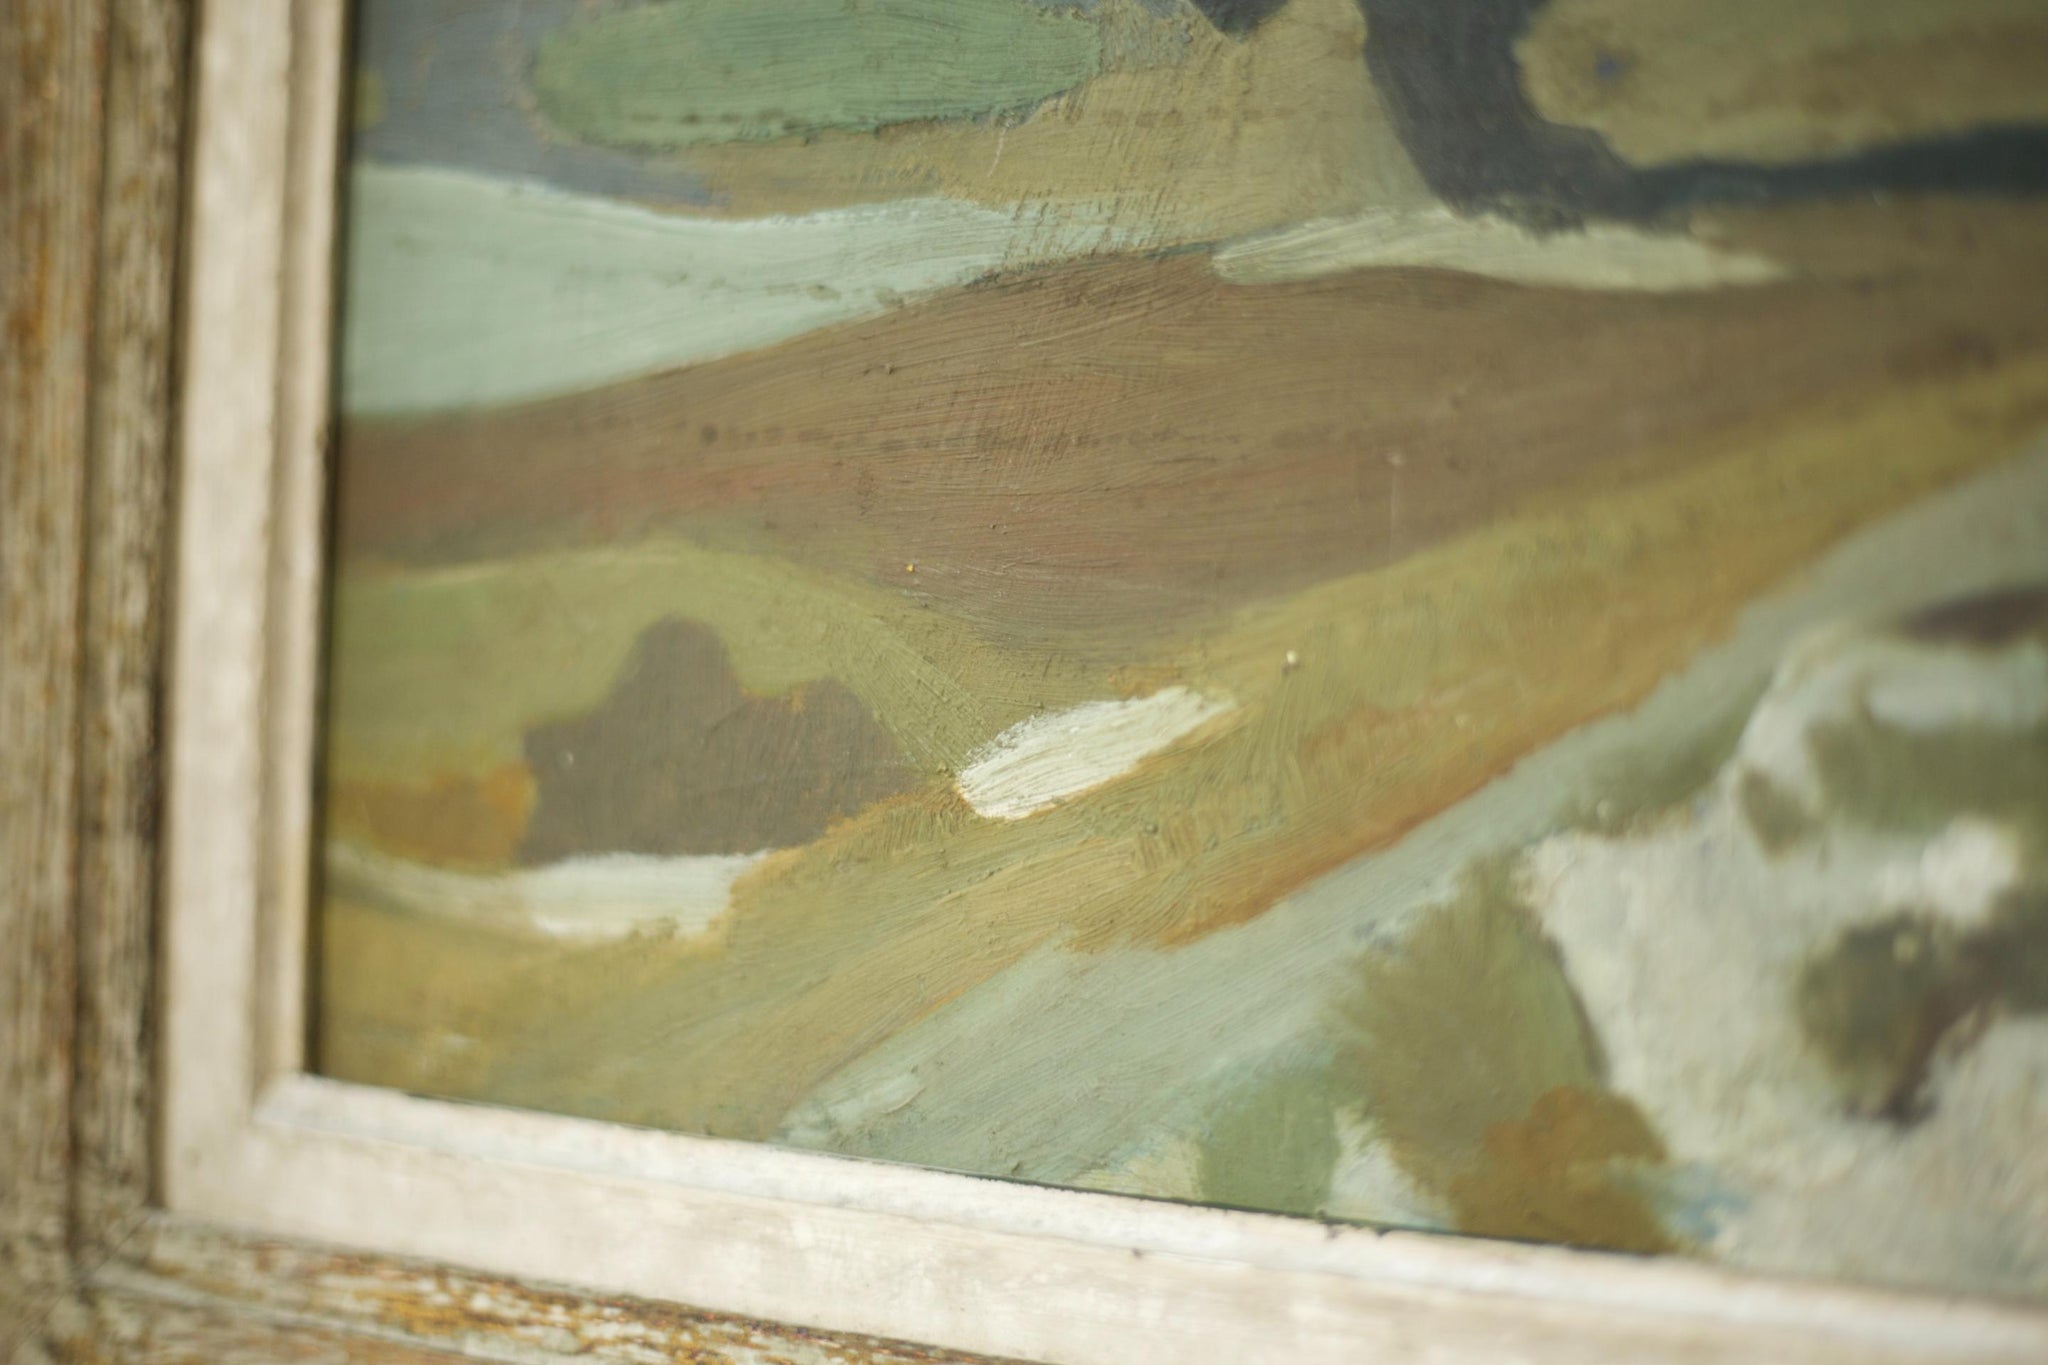 20th century oil on board landscape painting